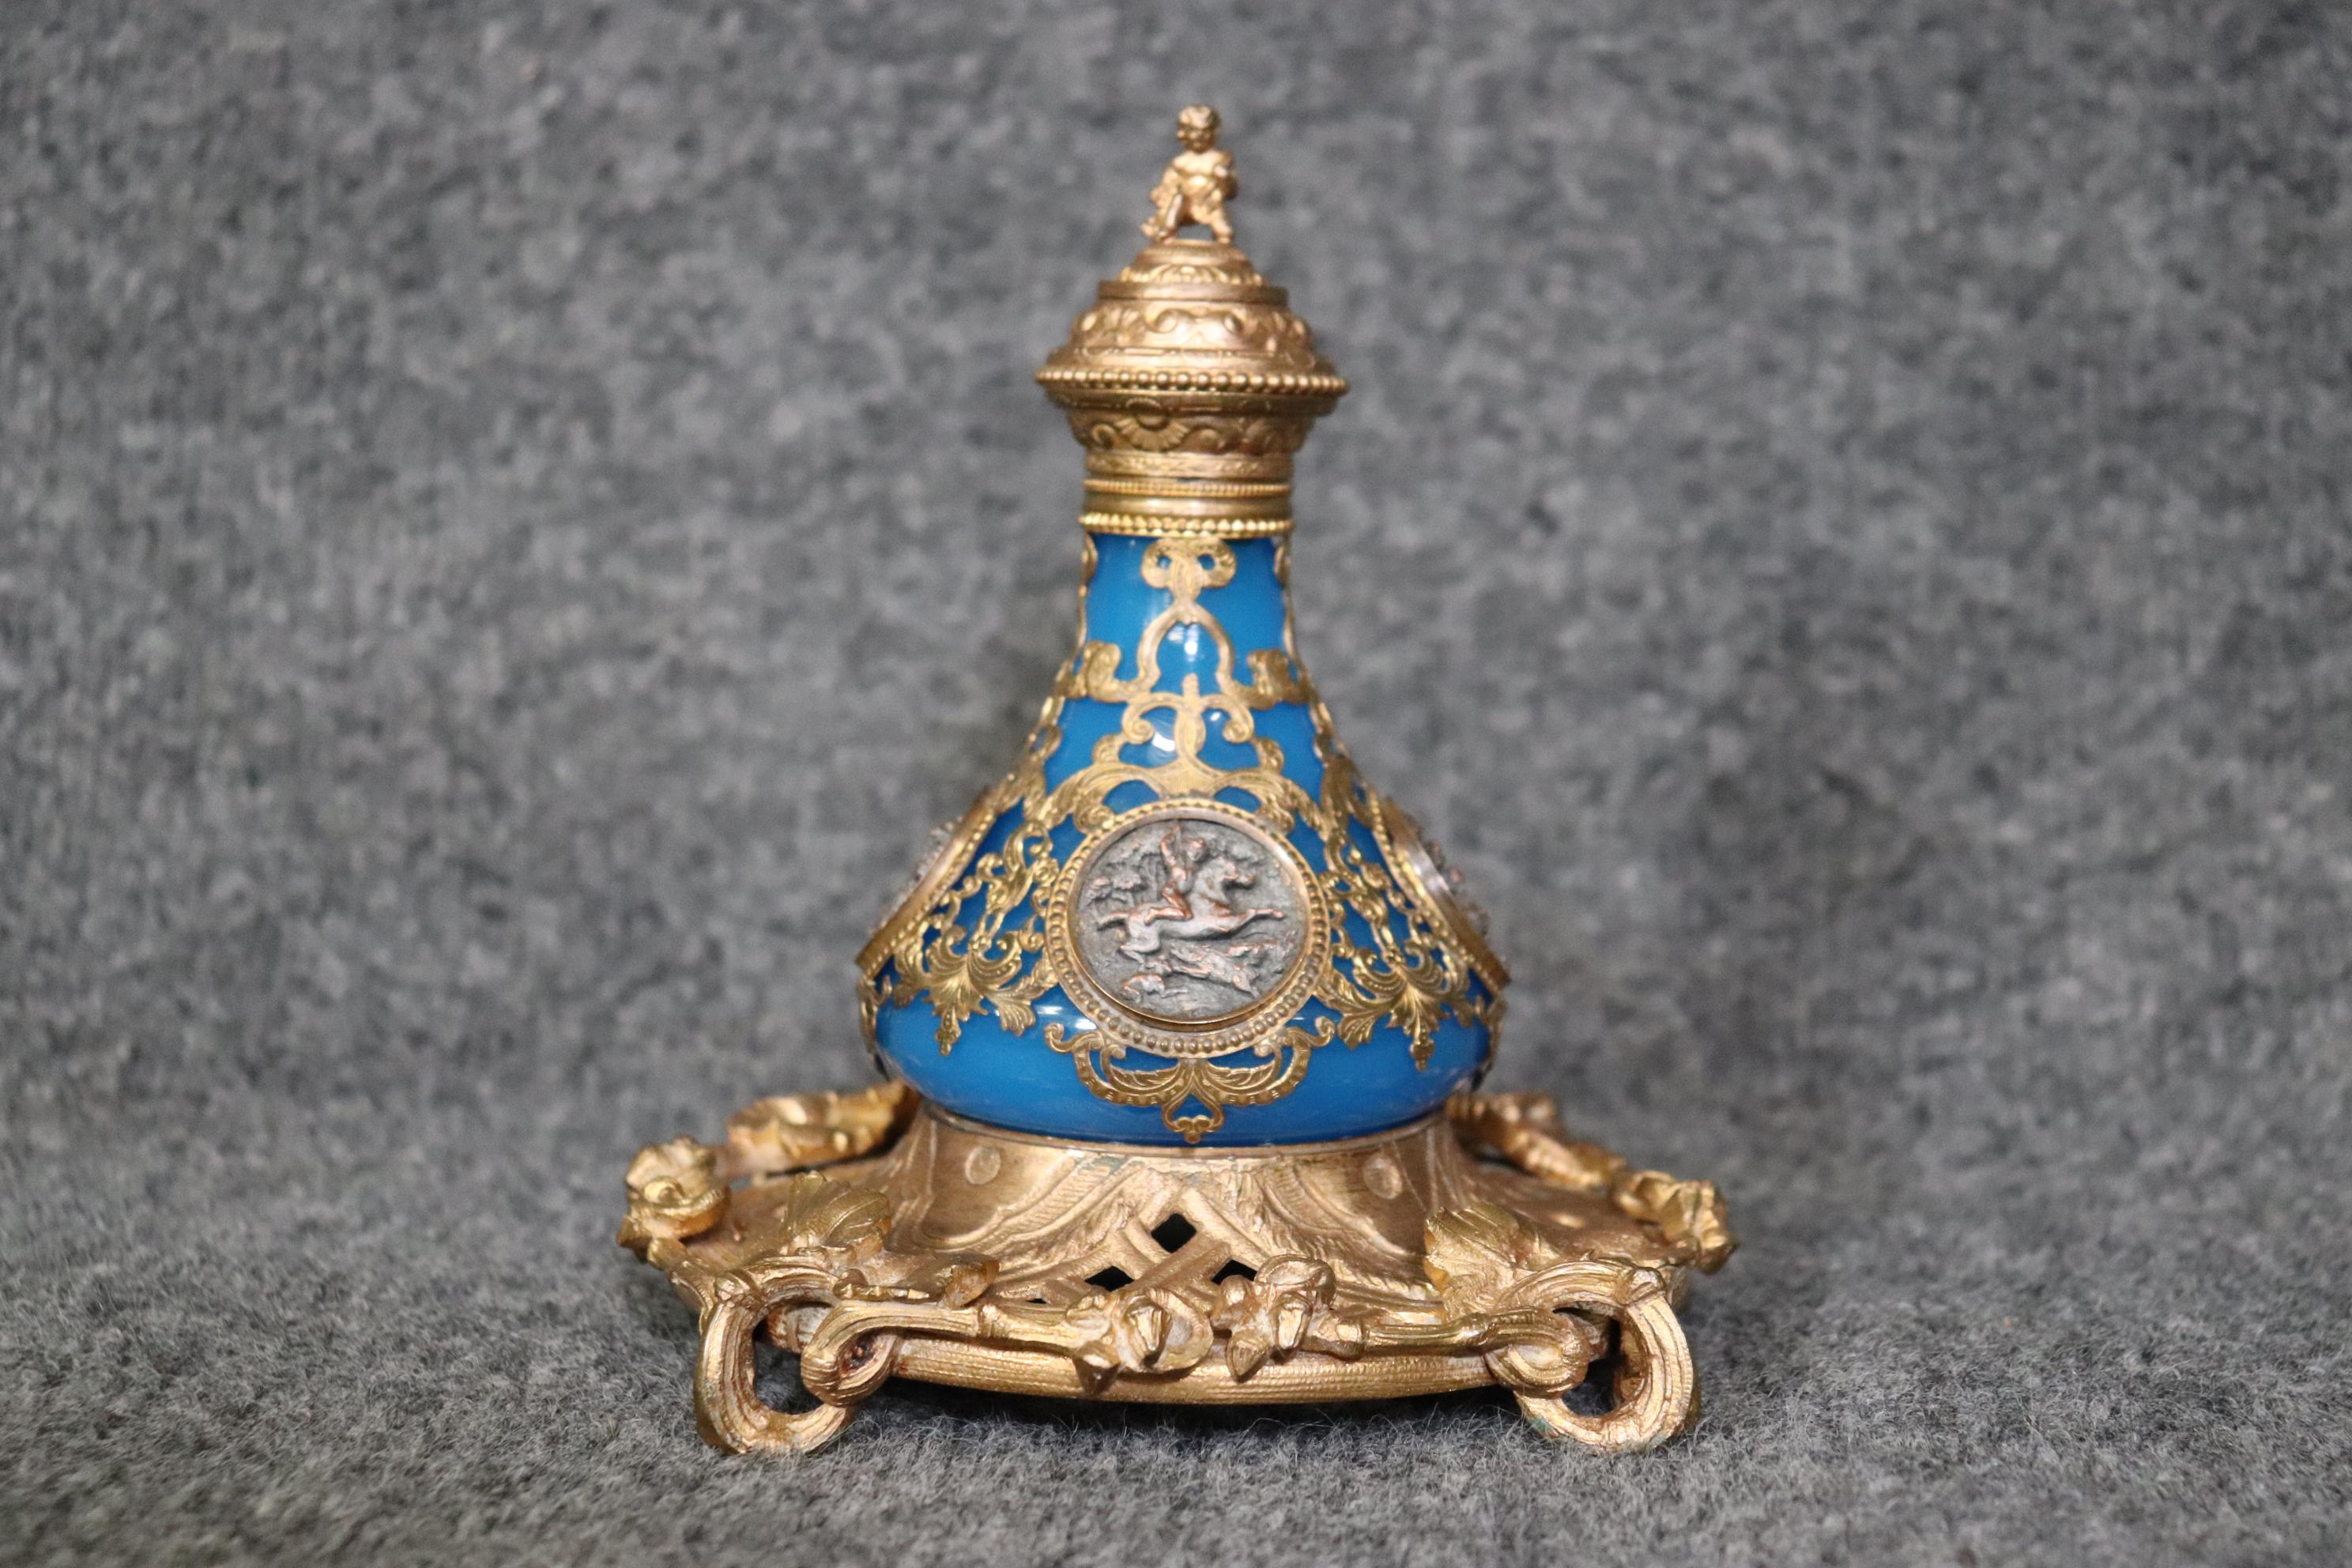 Dimensions- H: 6 1/2in W: 6in D: 6in 

This French Turn of the Century blue opaline and bronze ormolu 2 piece perfume bottle is made of the highest quality! If you look closely at the piece you can see the extremely detailed bronze ormolu mounts as